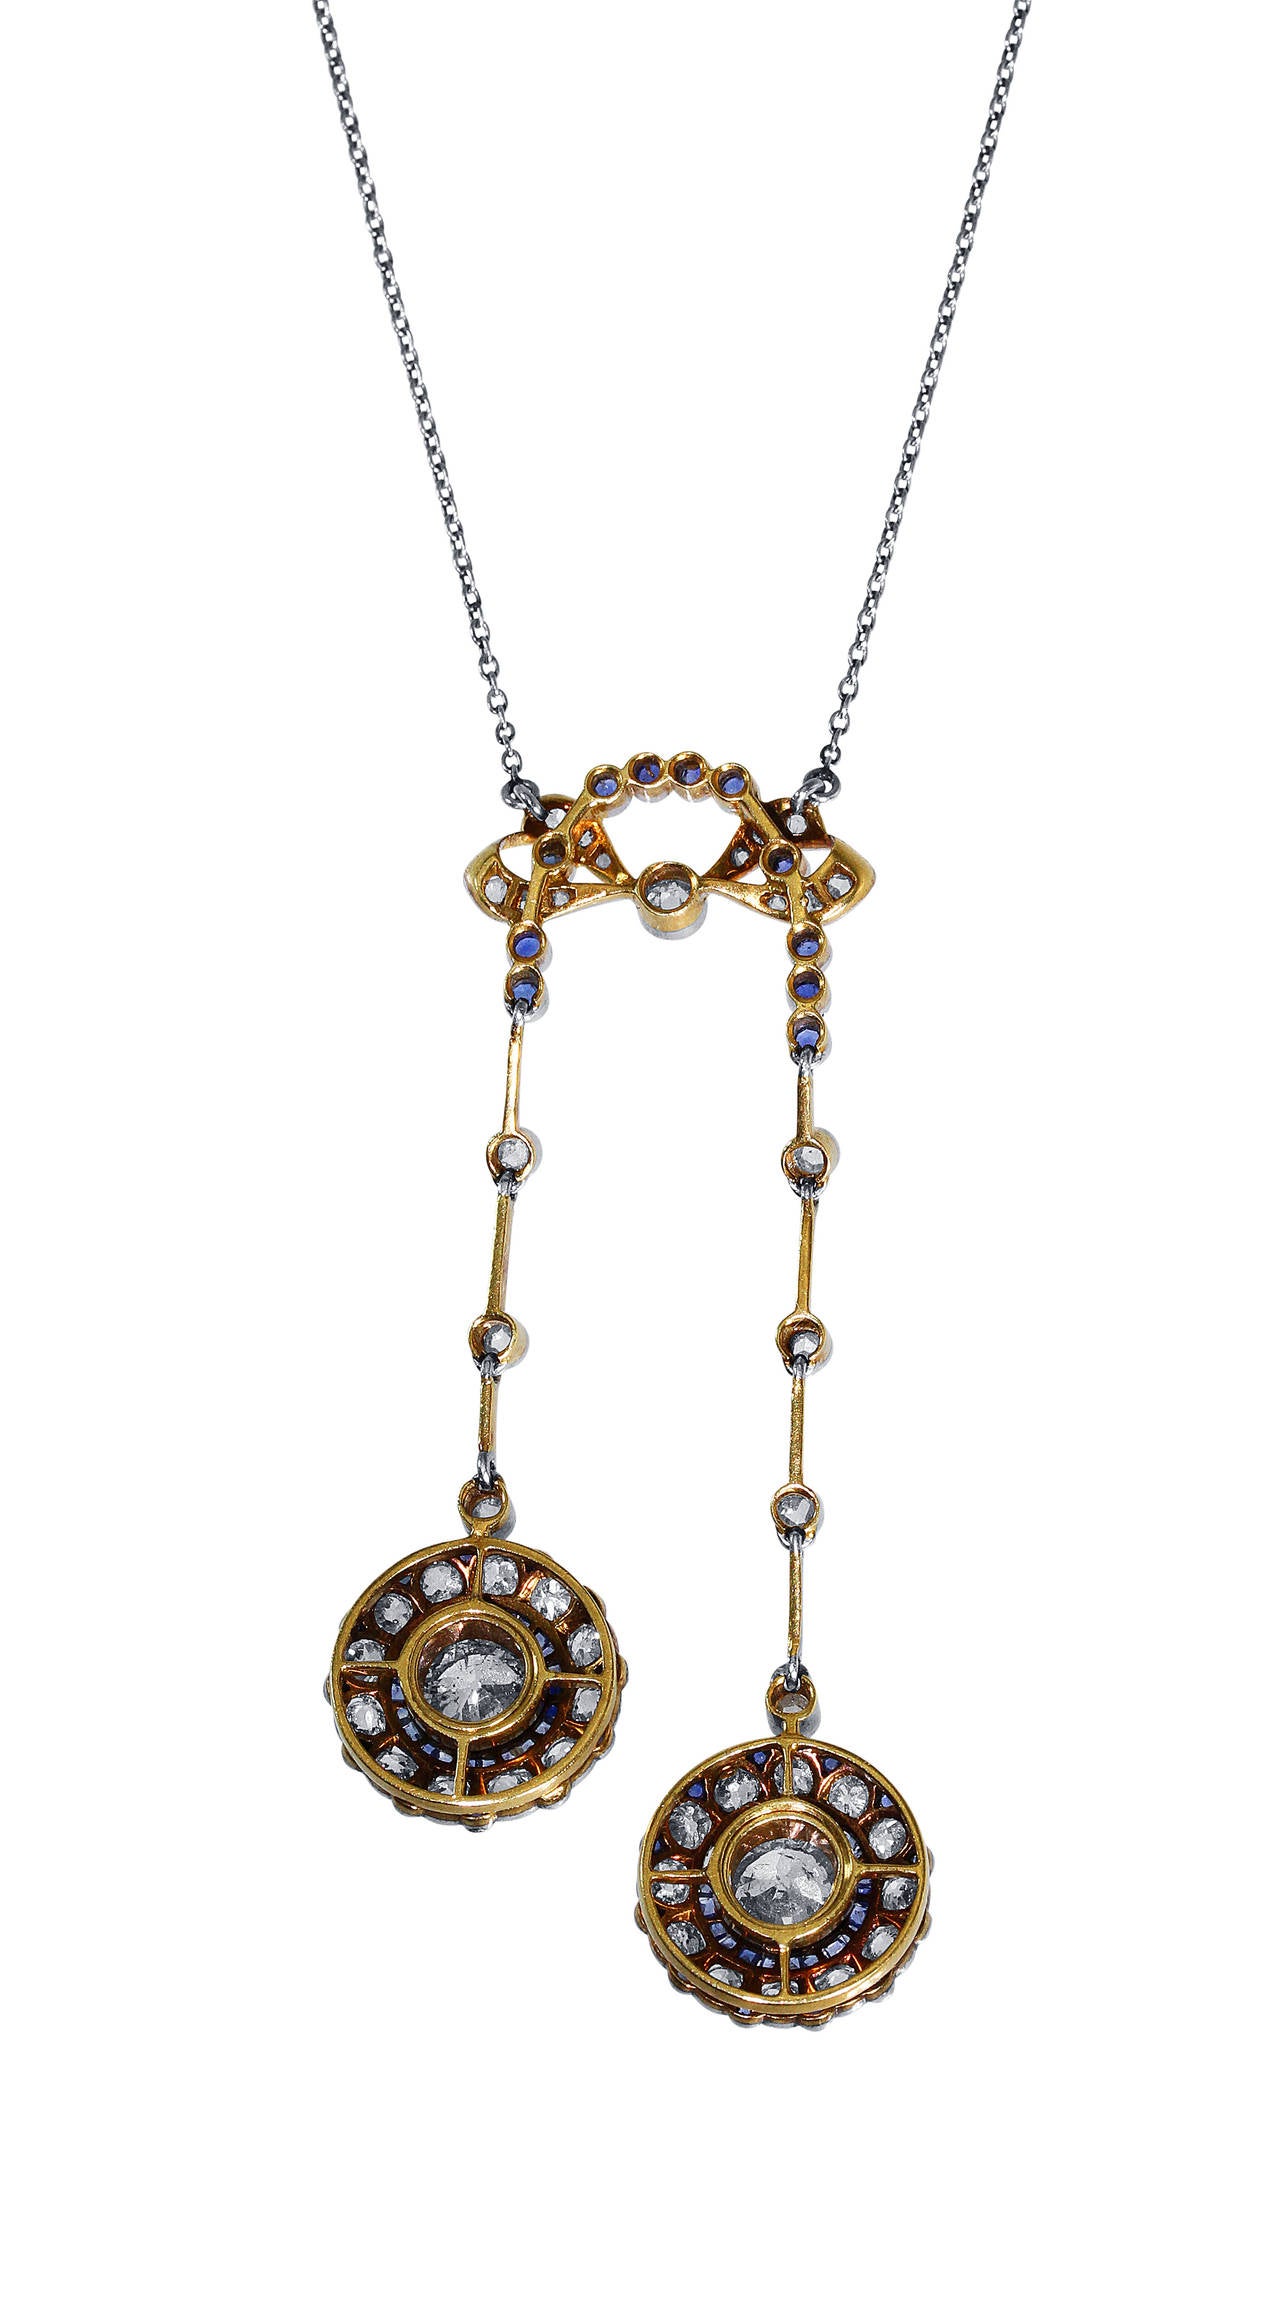 An Edwardian platinum, gold diamond and sapphire lavalière pendant necklace, circa 1910, the delicate pendant of bow design supporting two articulated pendants set with 2 old European-cut diamonds weighing approximately 2.00 carats, framed by 43